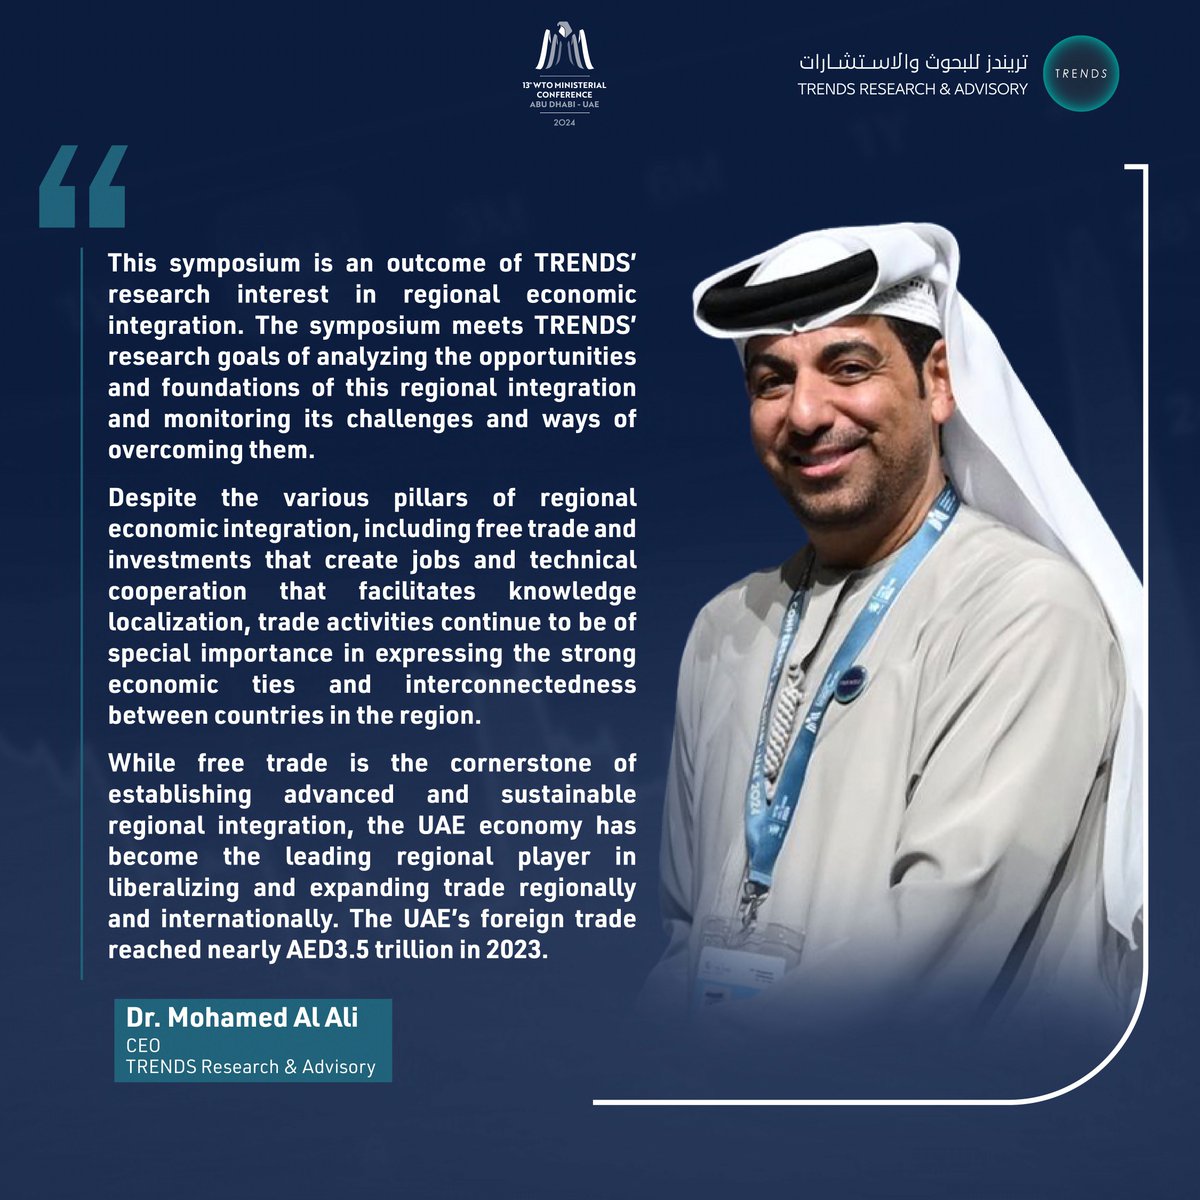 Dr. Mohamed Al Ali, CEO, TRENDS Research & Advisory - The panel discussion: Free Trade and Challenges to Economic Regional Integration.

#Knowledge_Empowers_Future #WTOConference #FreeTradeAgreement #RegionalEconomicIntegration #TradeChallenges #GlobalTradeForum #TradePolicy